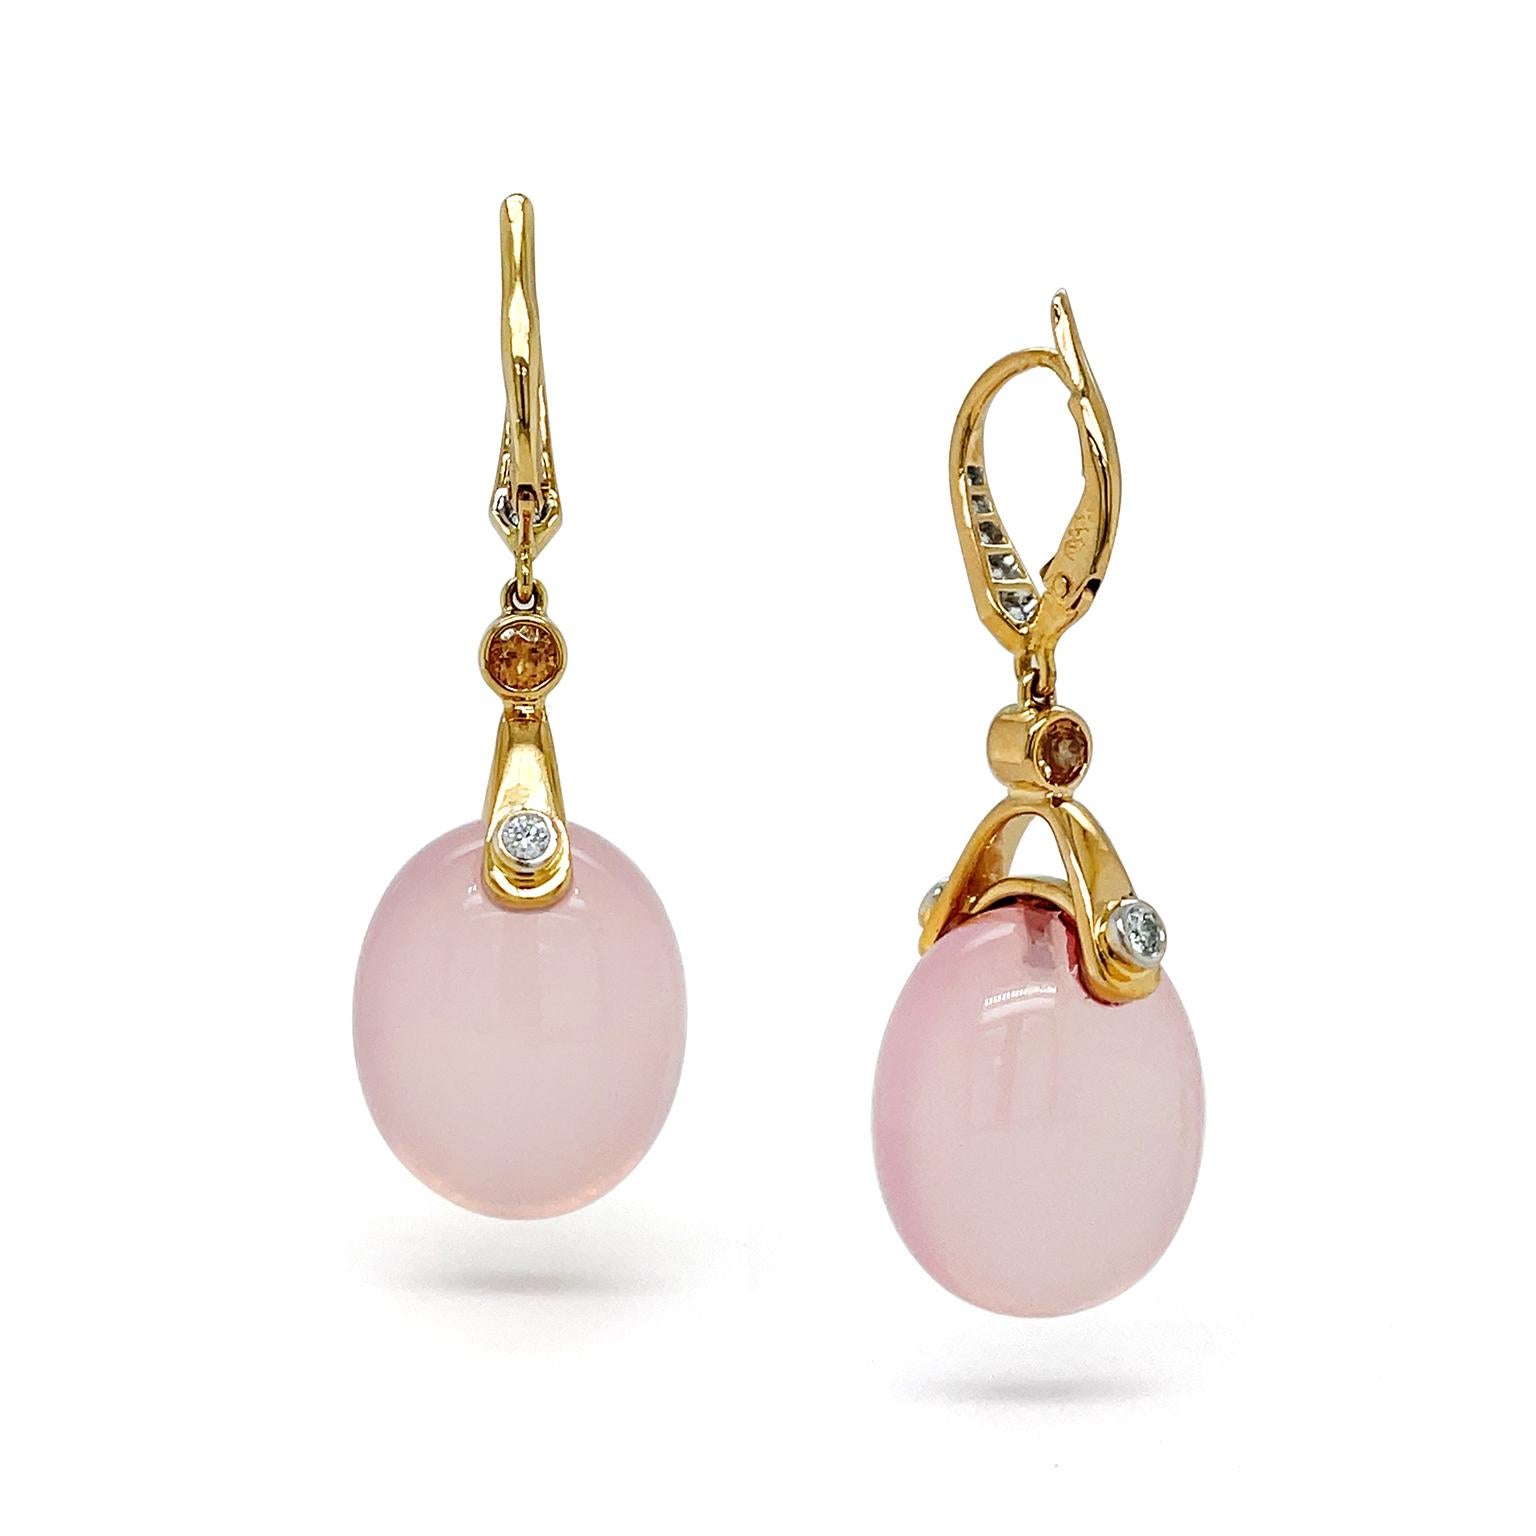 The delicate elegance of rose quartz is highlighted by diamonds and 18k yellow gold for these earrings. 18k yellow gold lever backs are set with brilliant-cut diamonds for a flickering white light, connecting to a single bezel set brilliant-cut